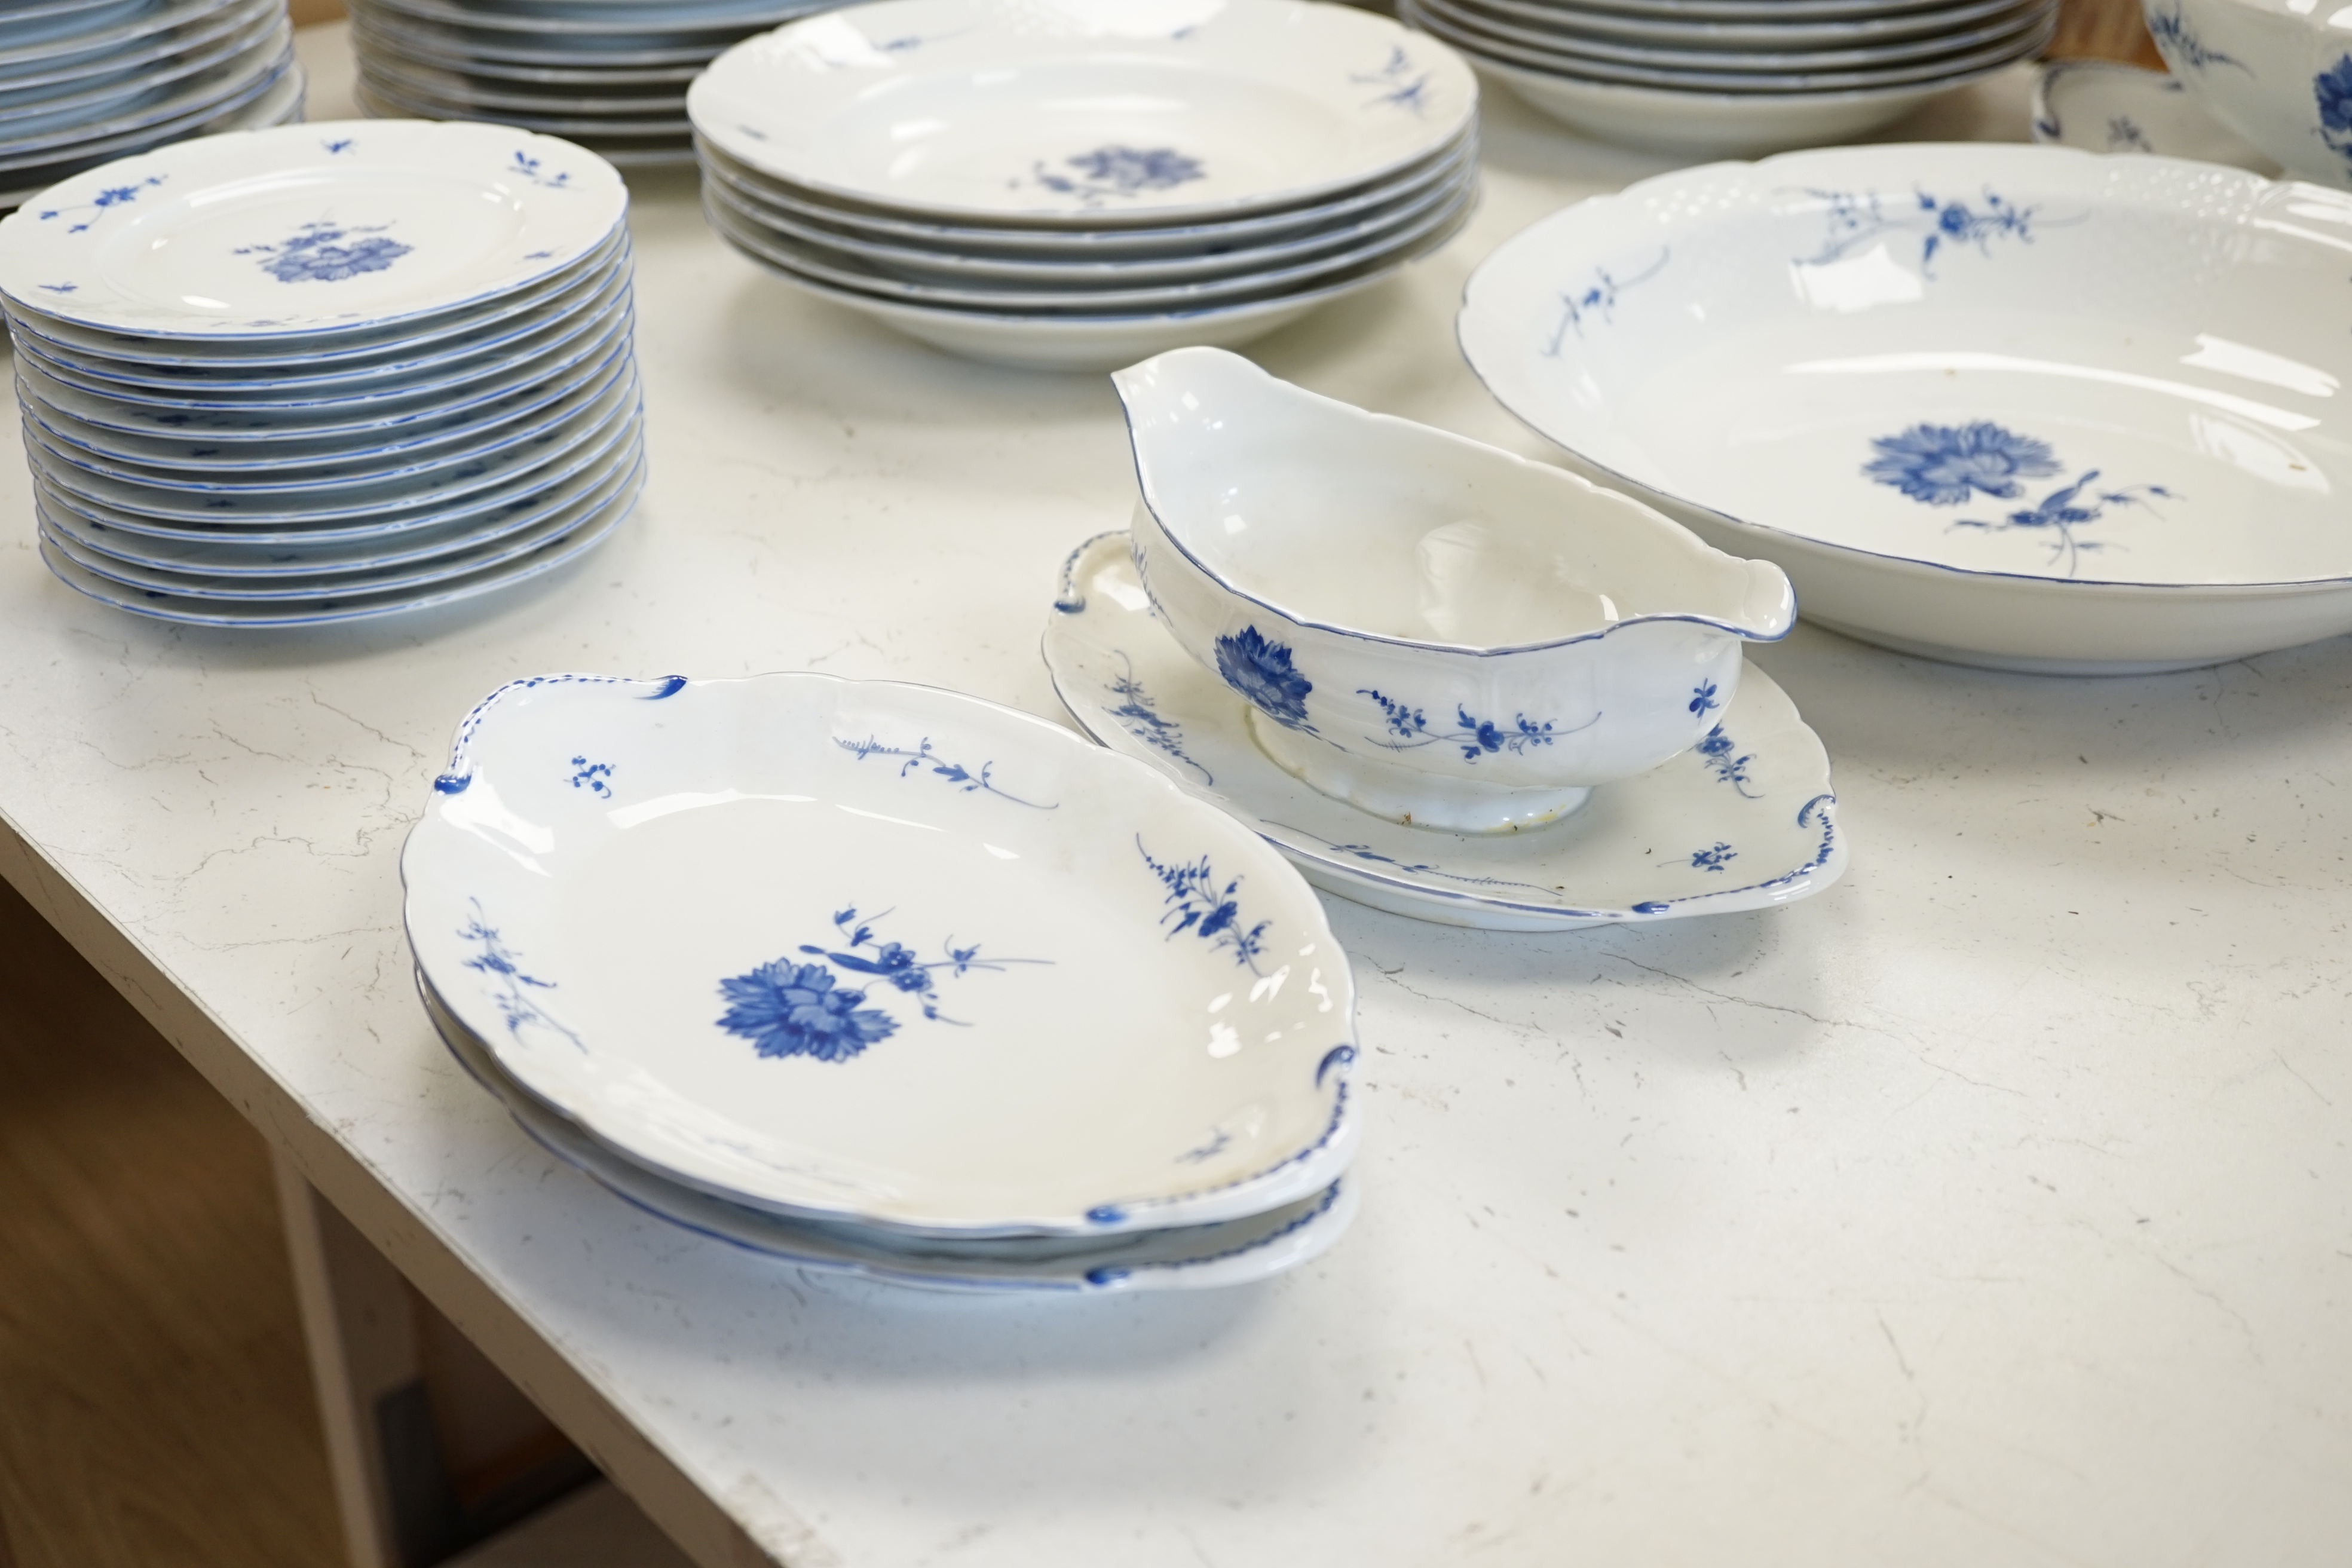 A Chantilly blue and white floral dinner service